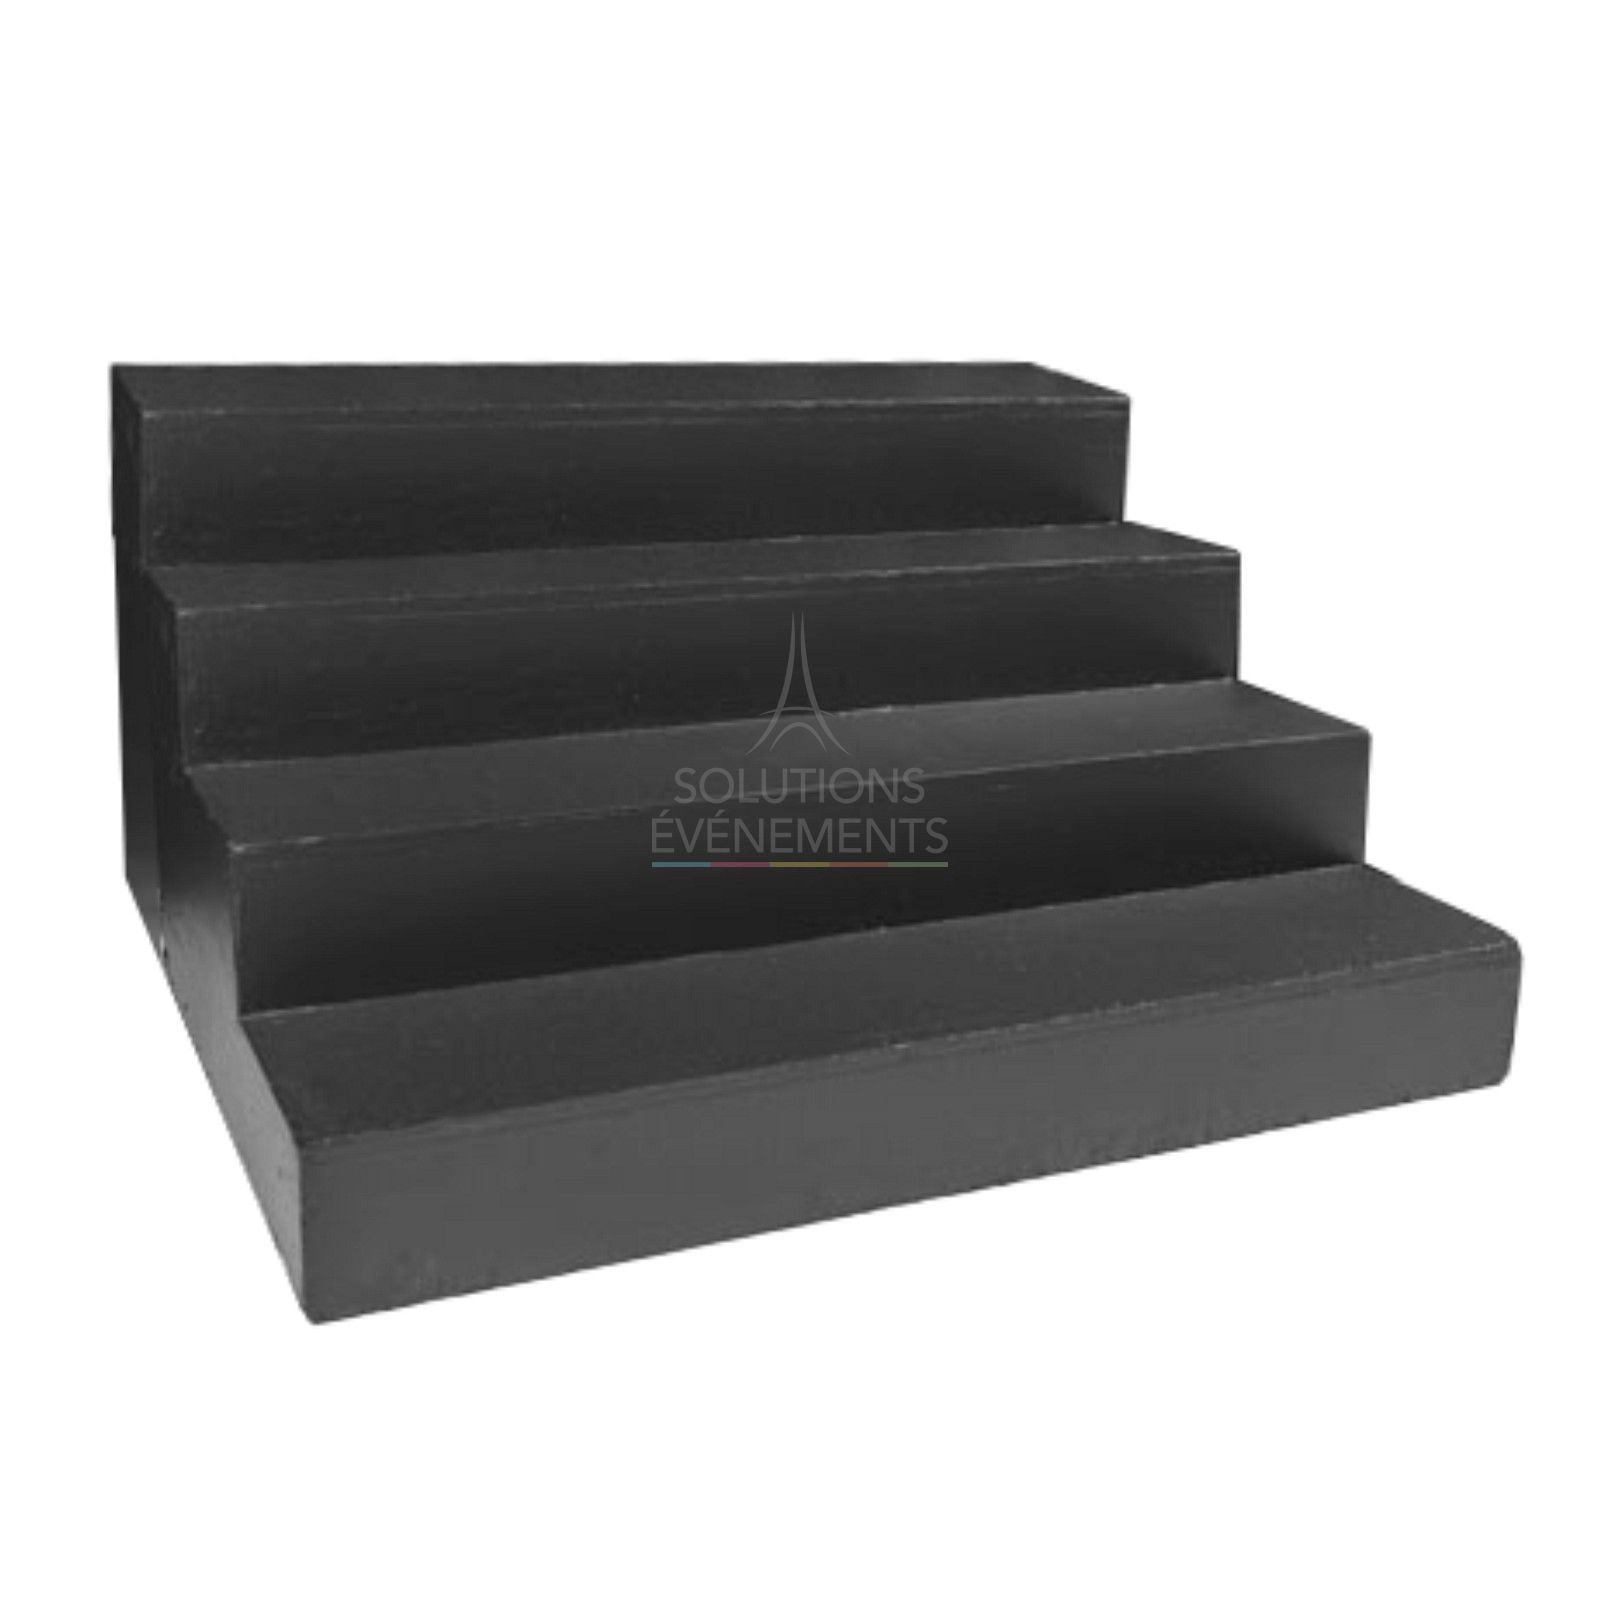 Rental of stairs for stage, podium and platform with a height of 80cm